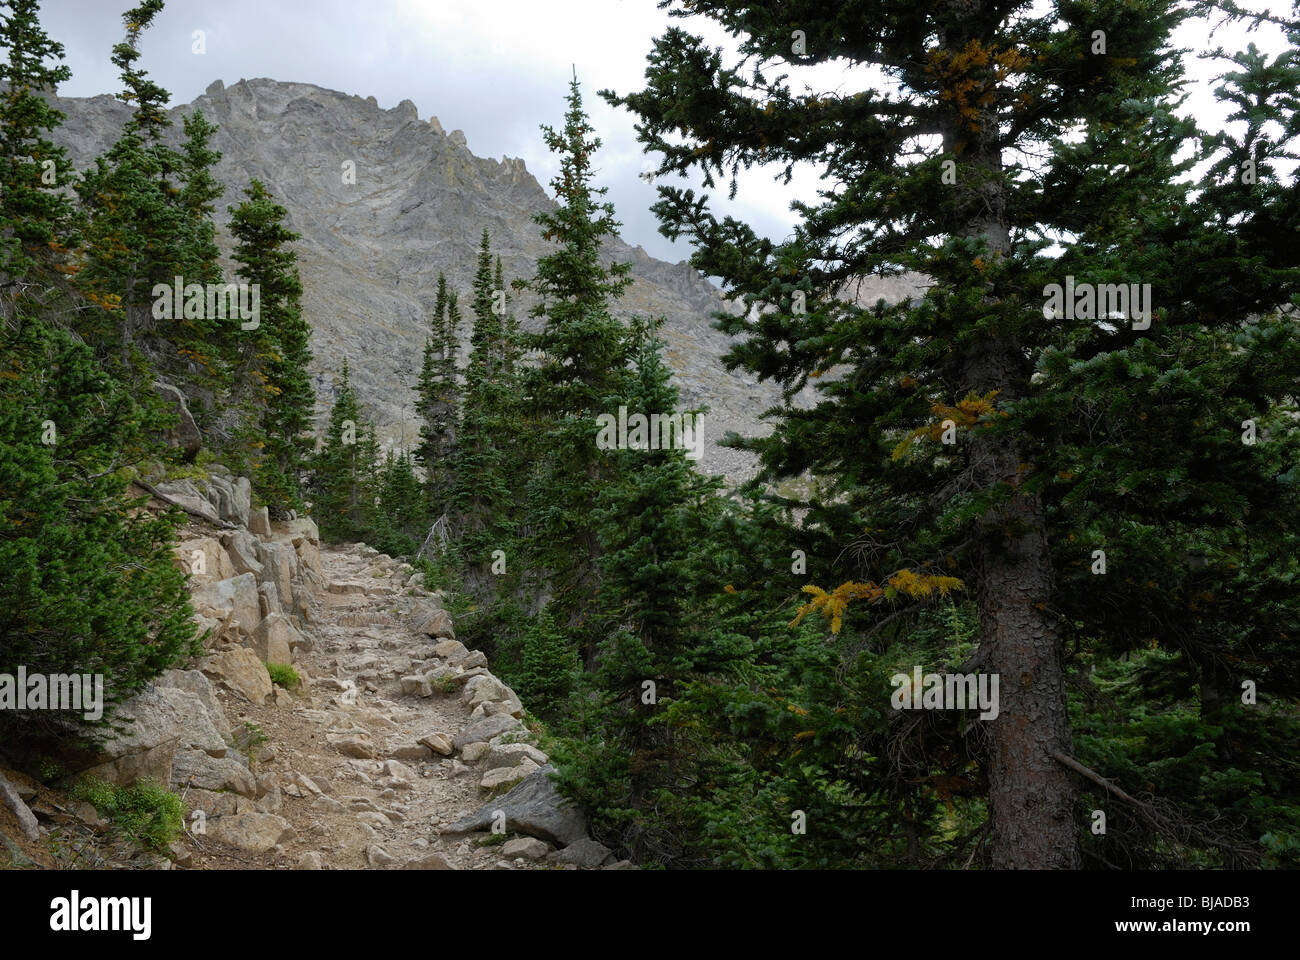 Pine trees in the Rocky Mountain National Park in Colorado State, USA Stock Photo